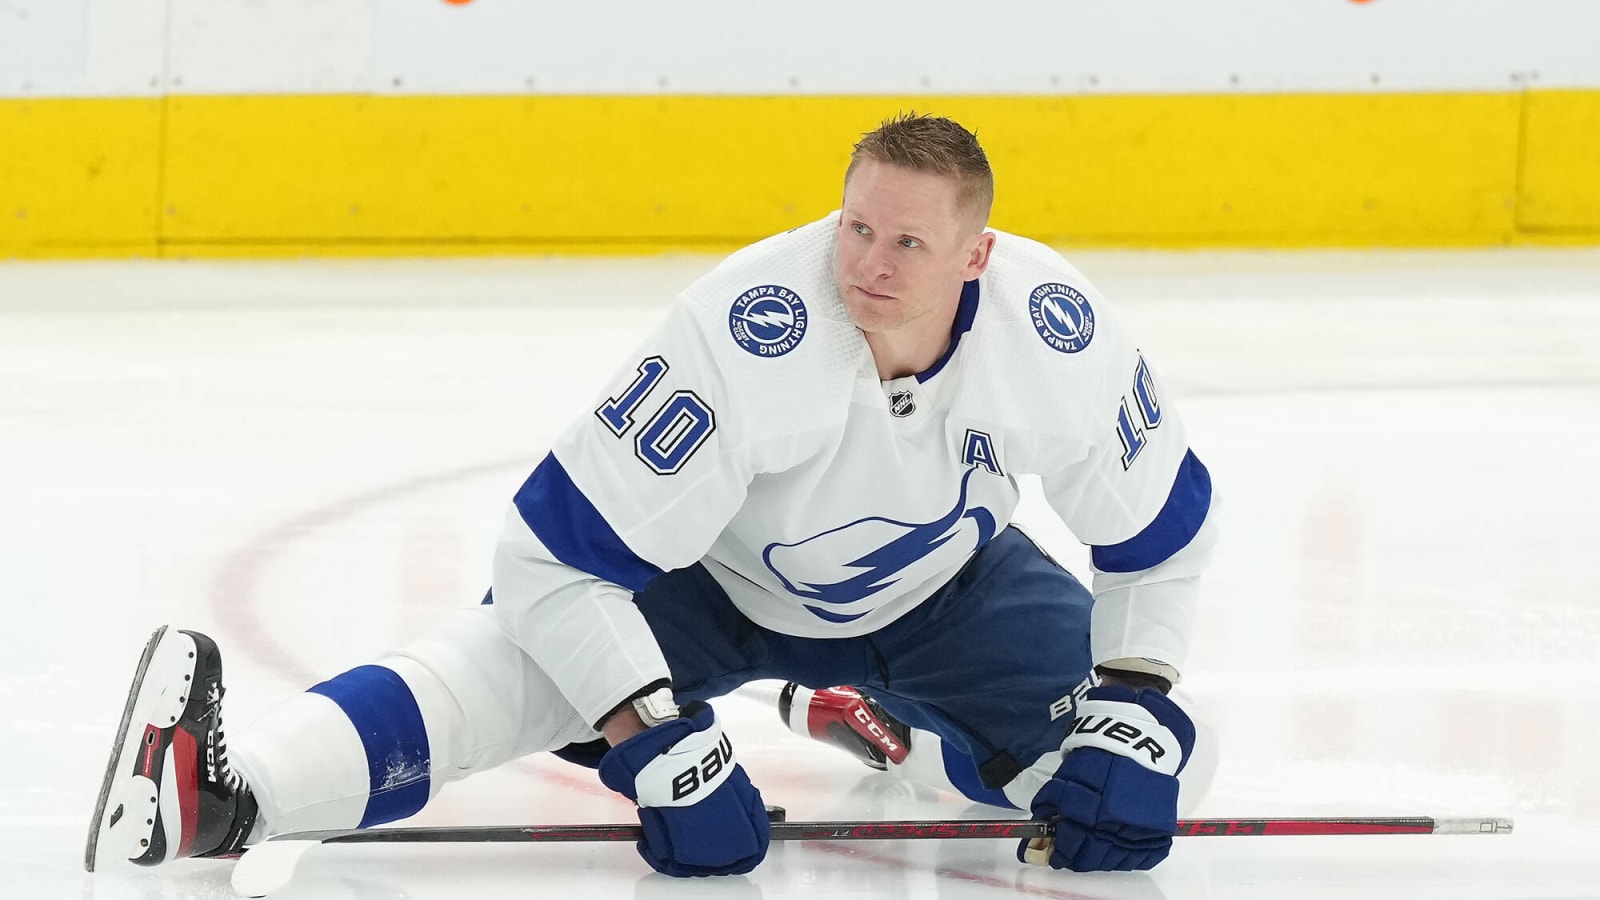 Why did Corey Perry re-sign with Anaheim Ducks, rather than test